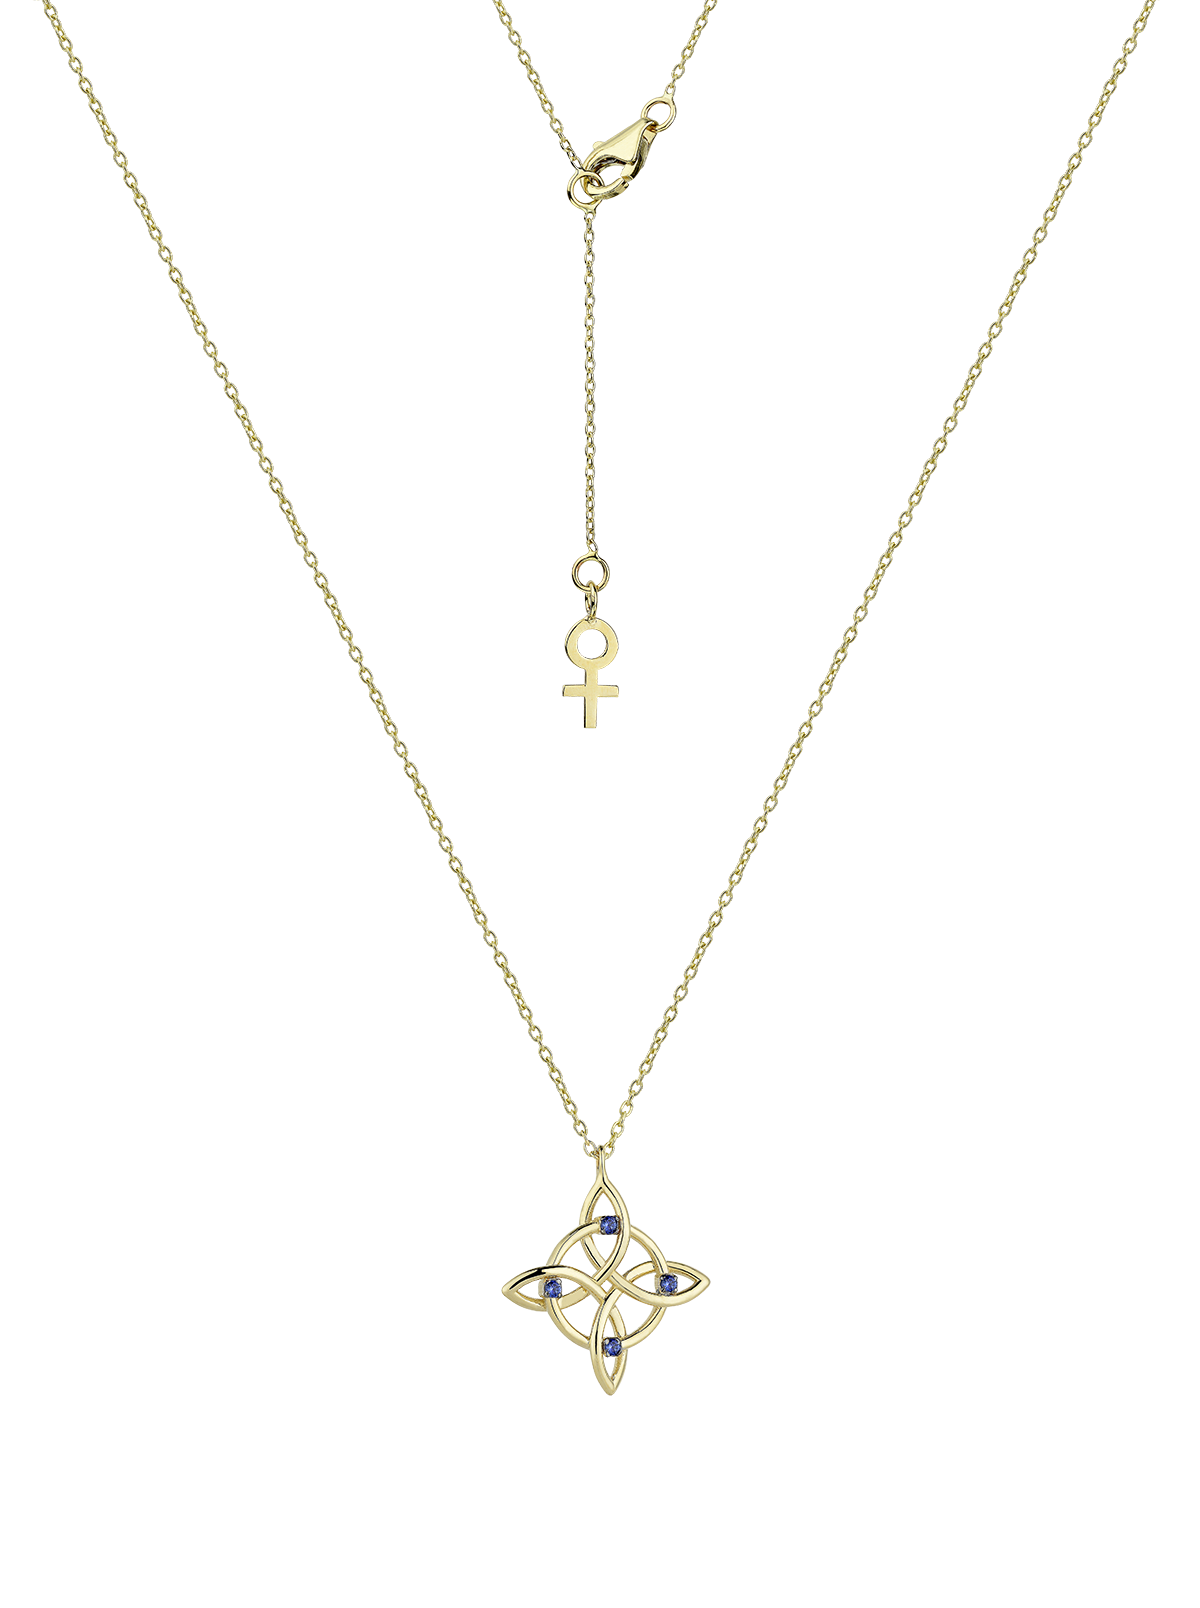 Pure Magic Knot Necklace in Yellow Gold - Her Story Shop